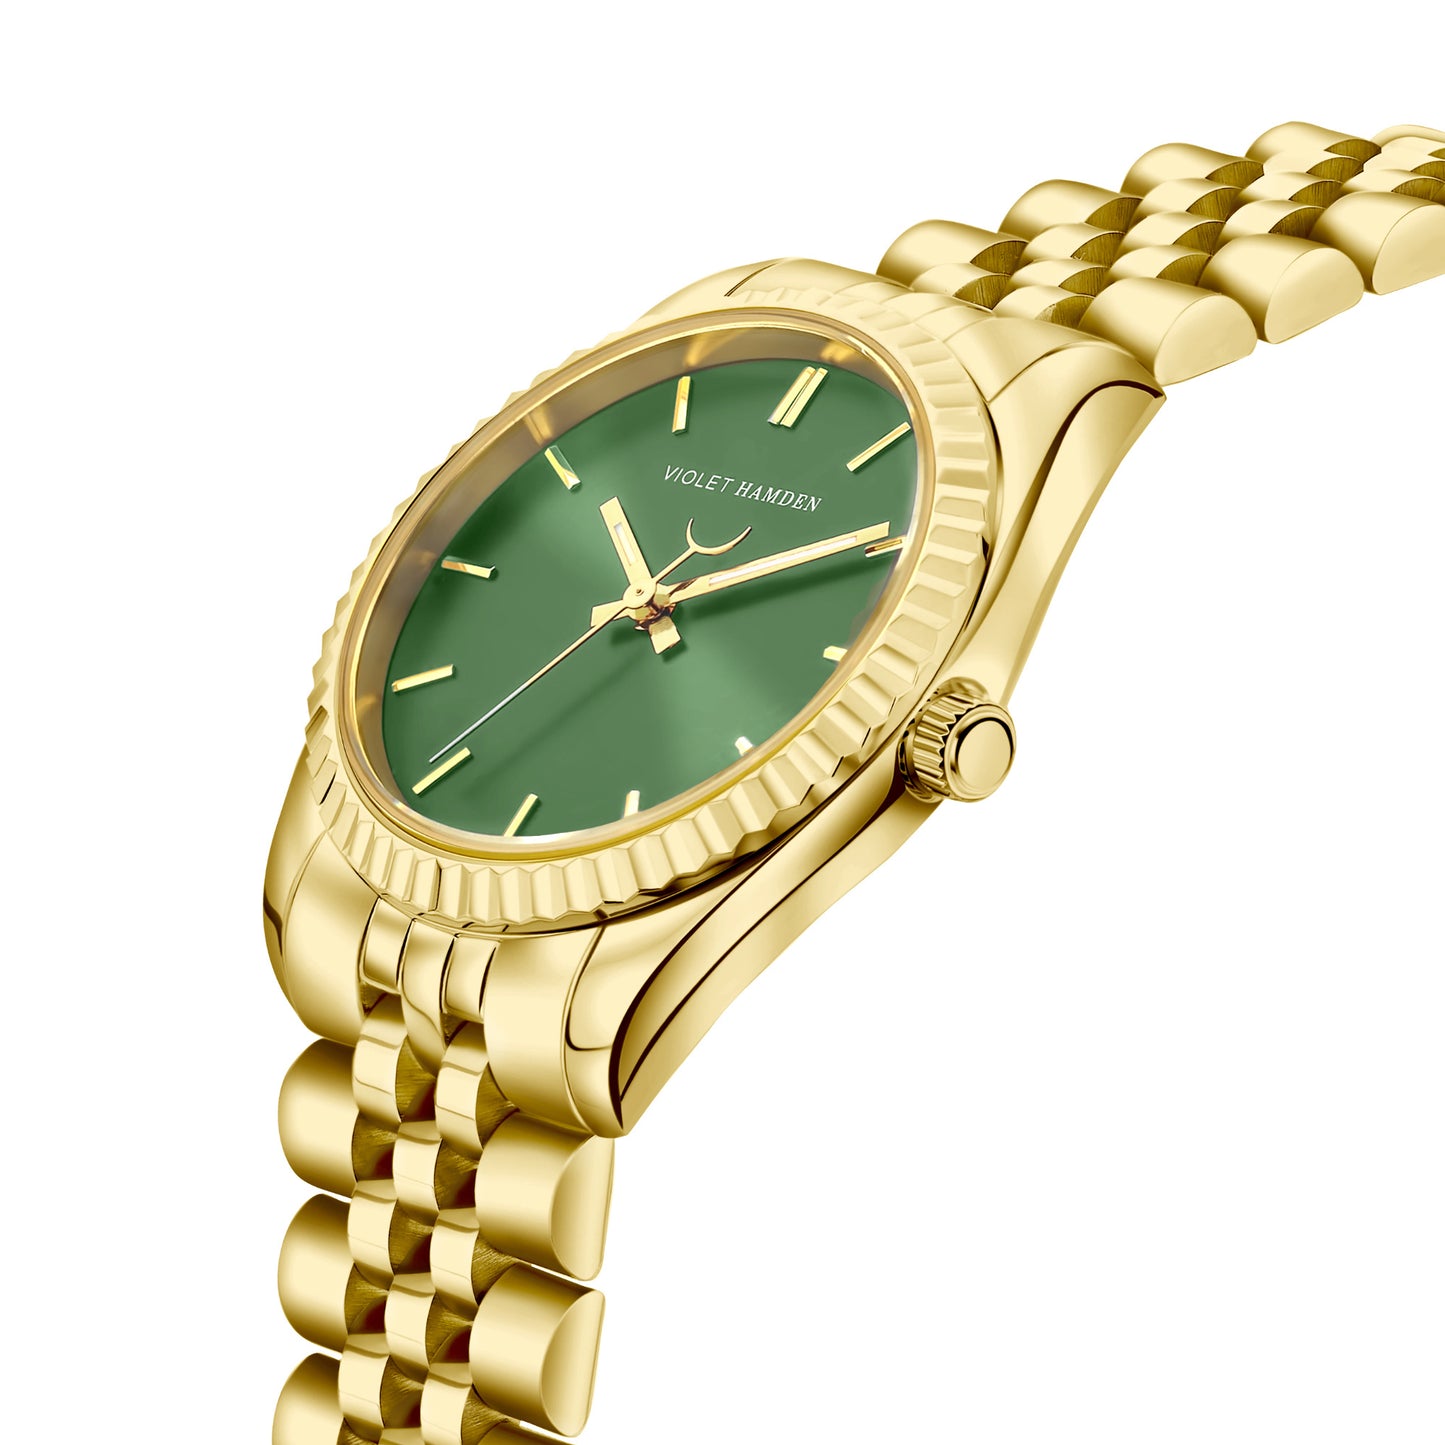 Sunrise round ladies watch gold coloured and green